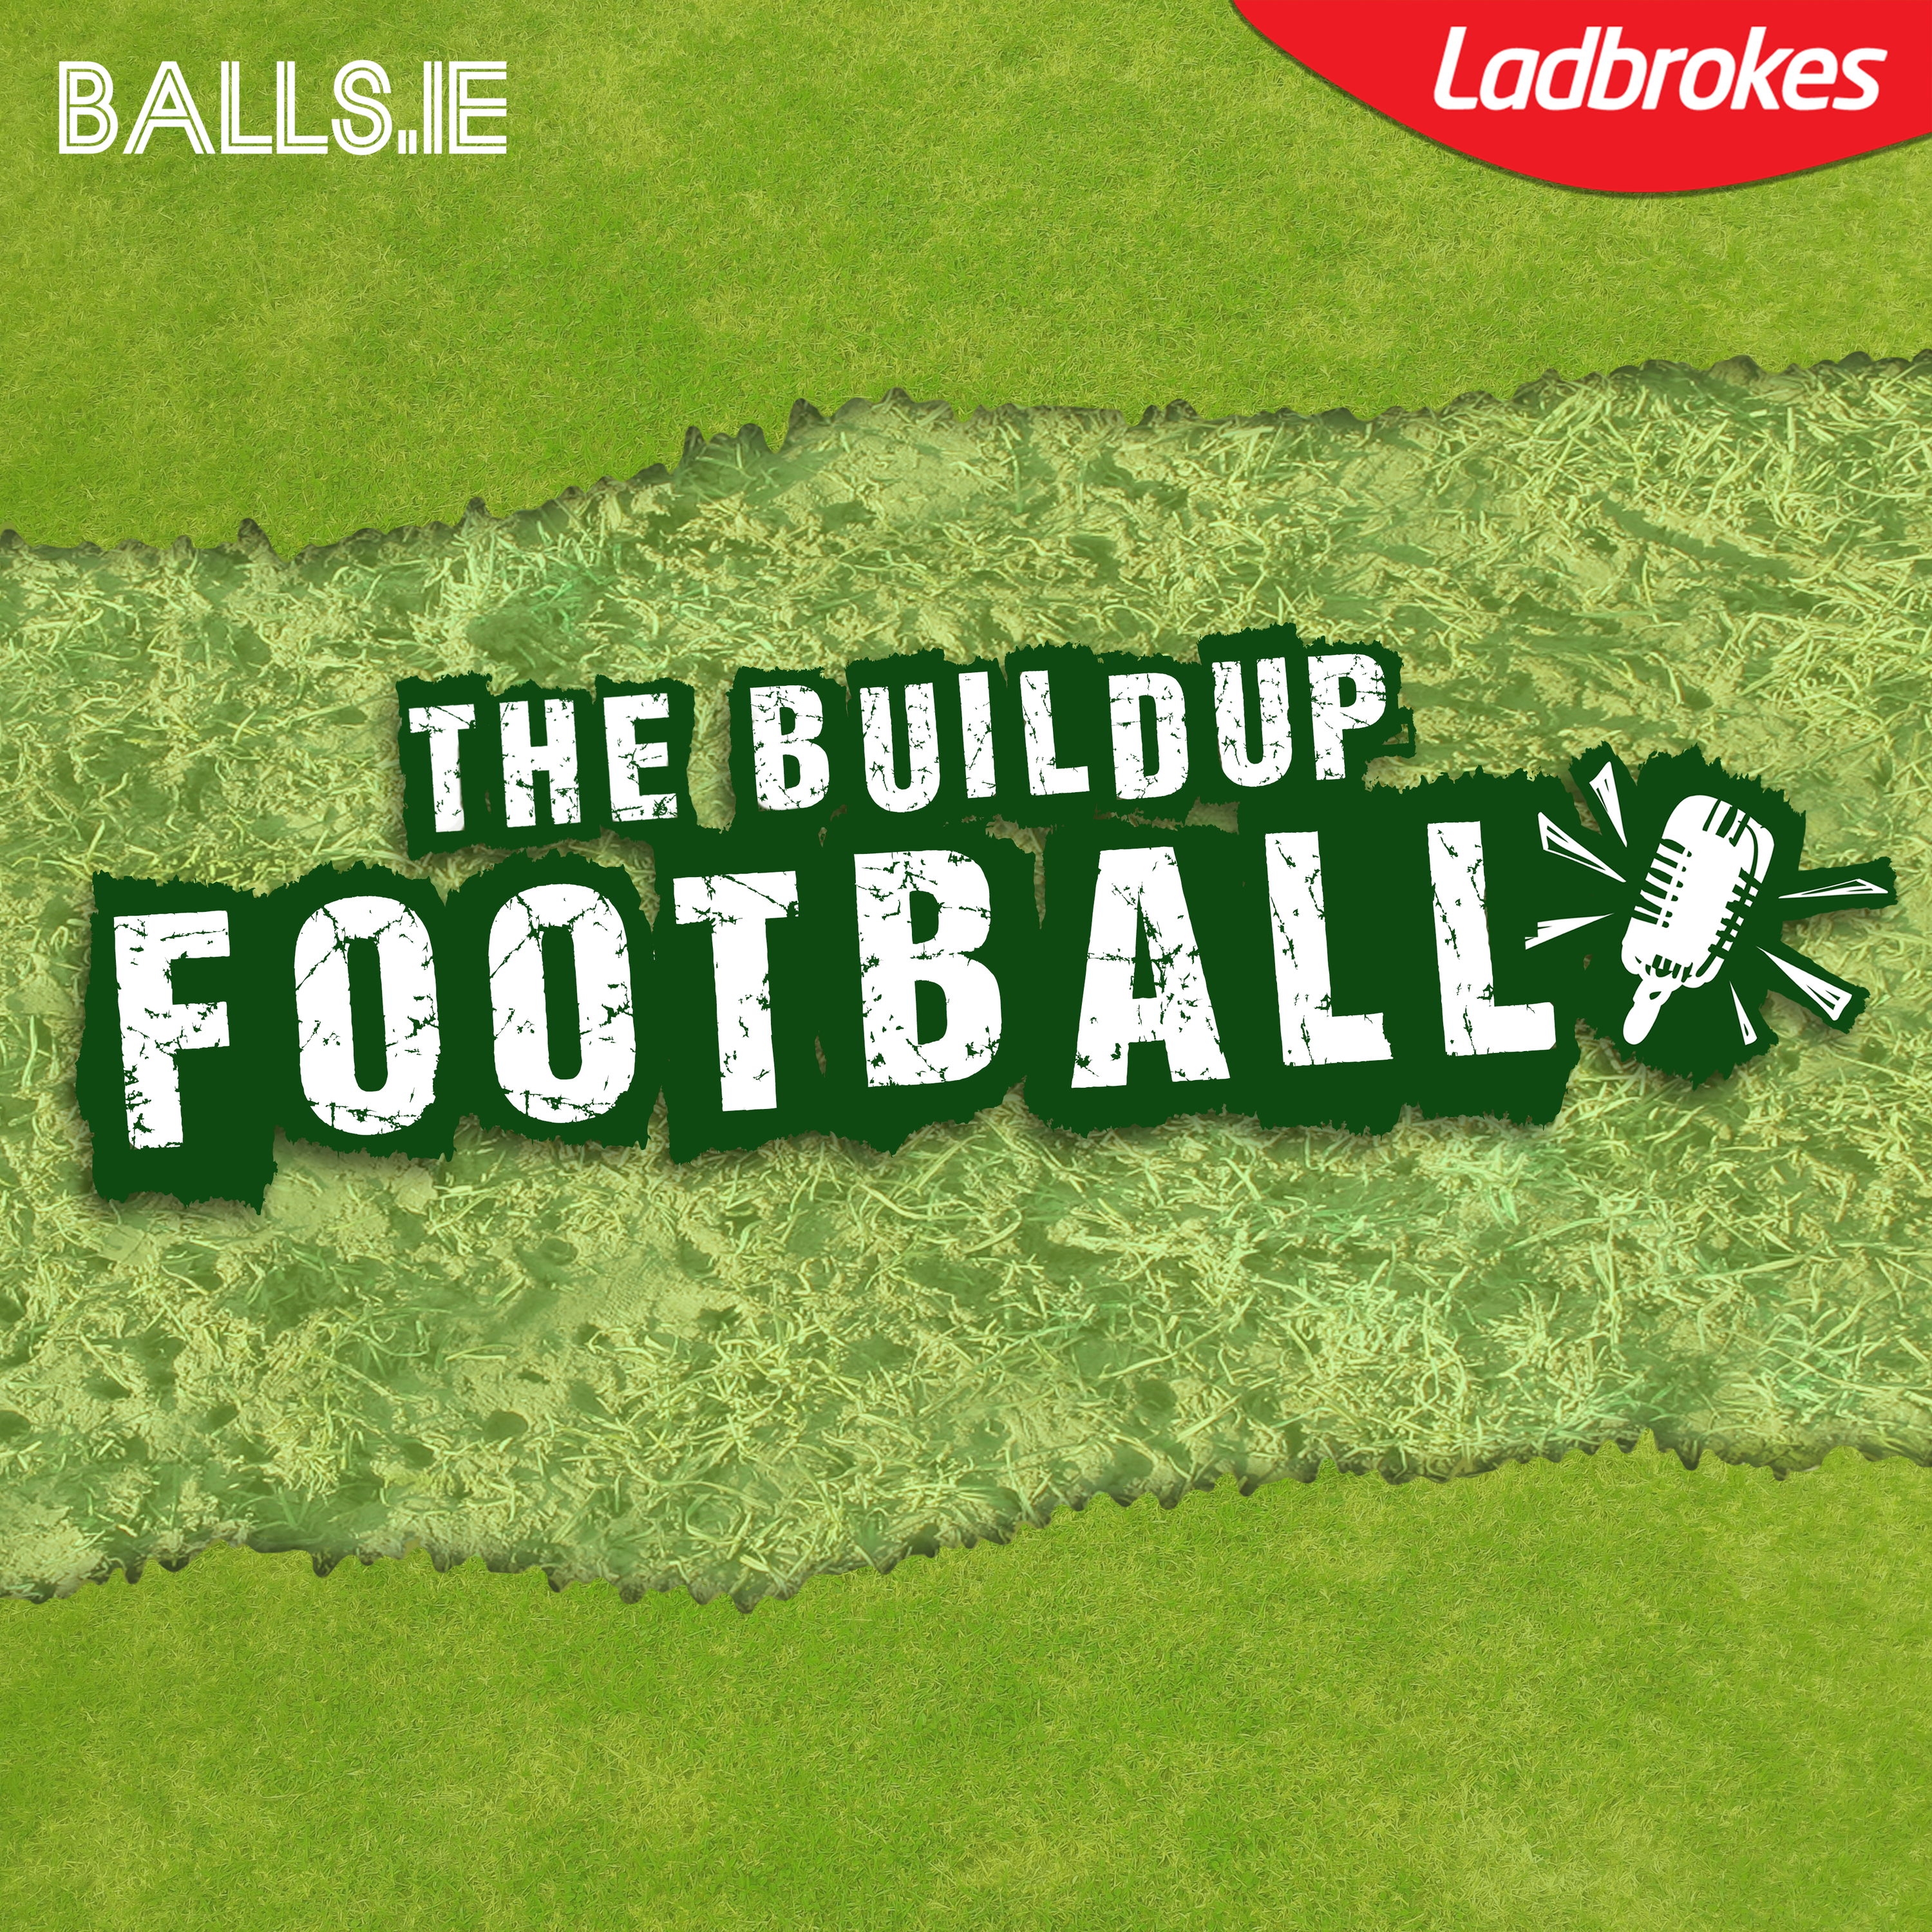 The Buildup: Hope At Last, With Kevin Doyle